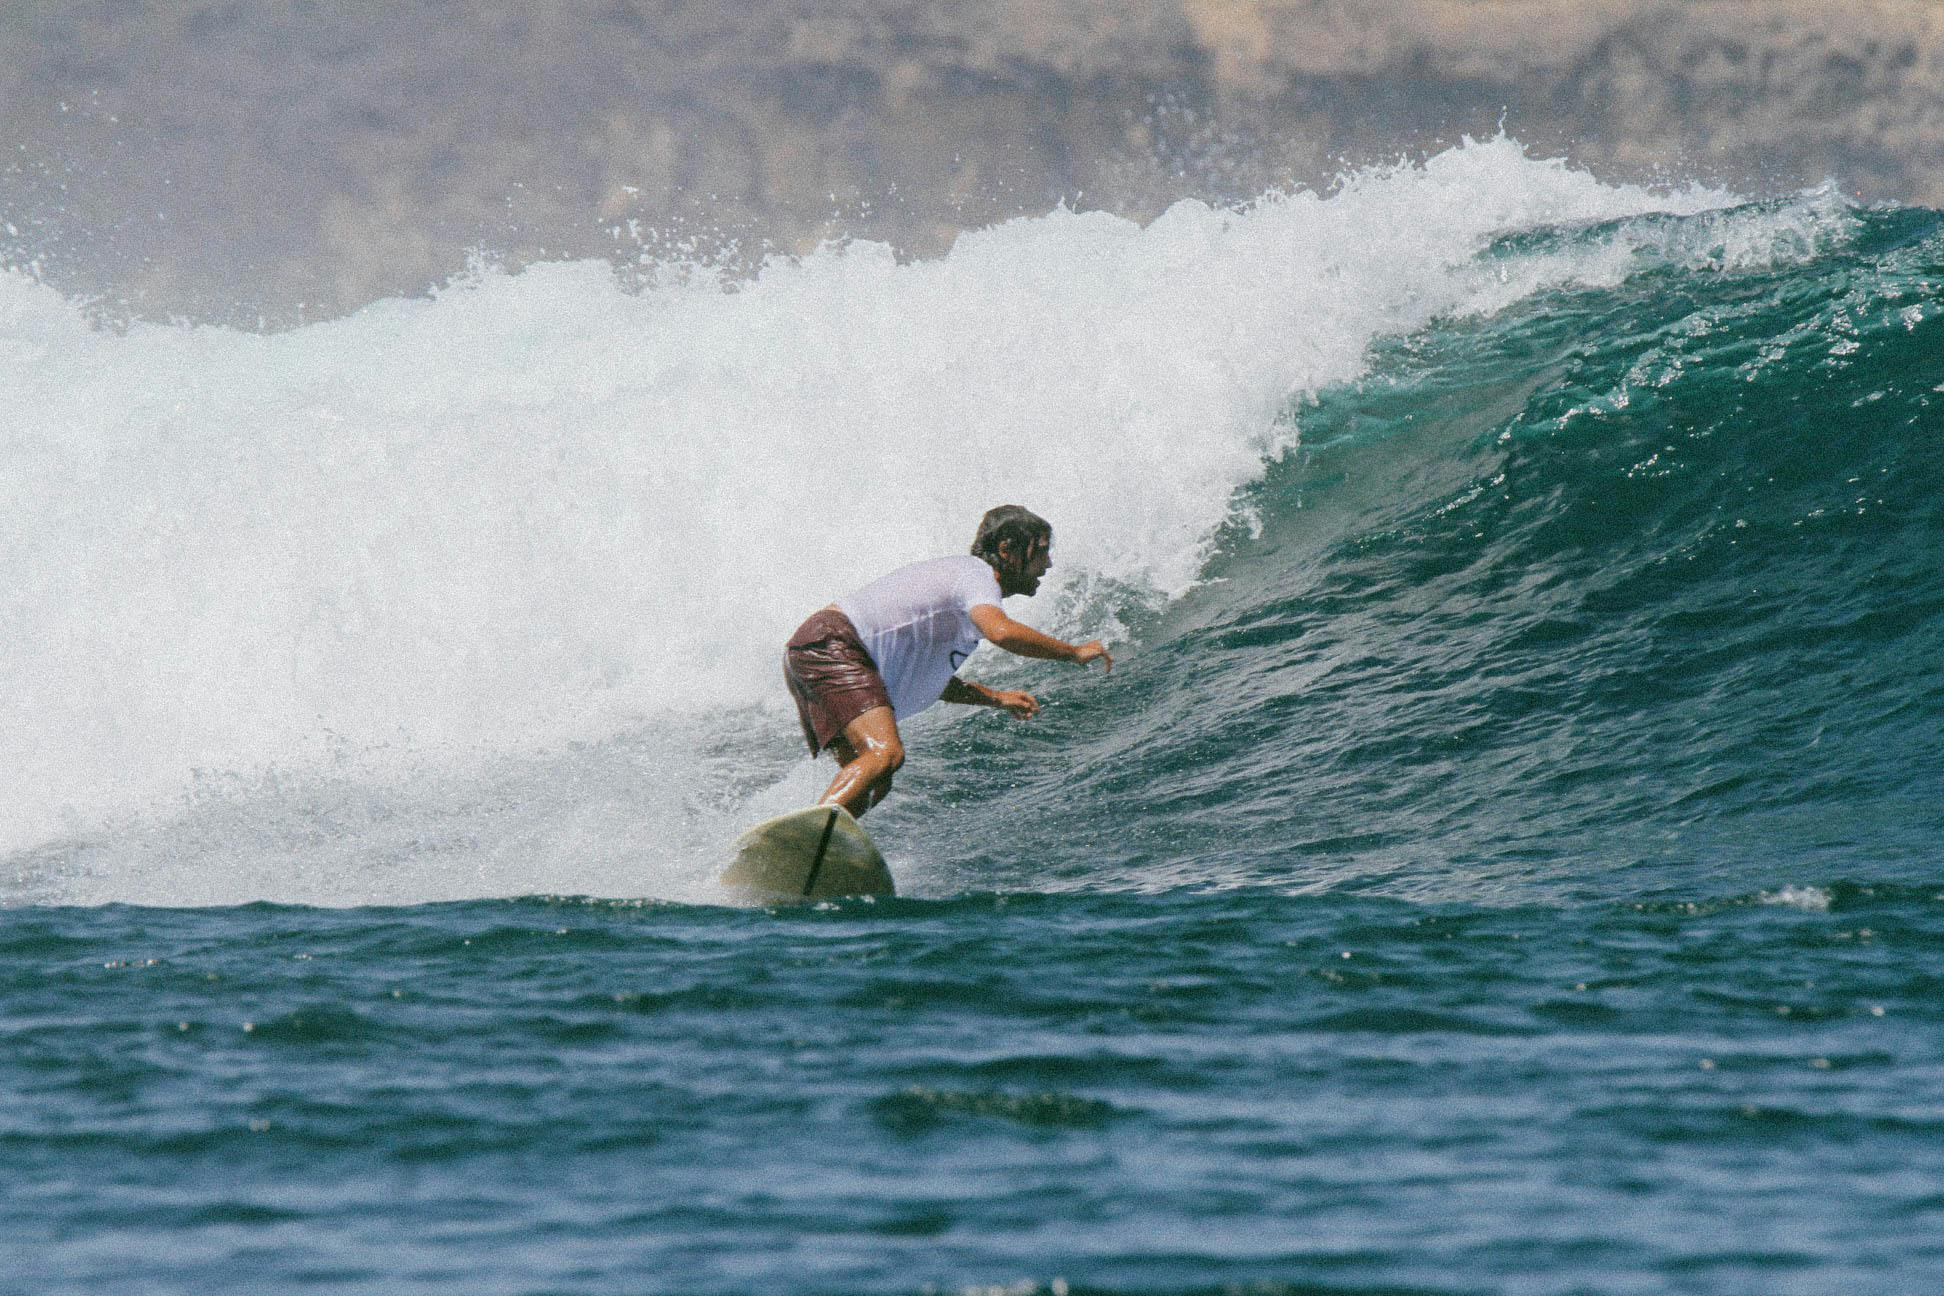 A picture of me surfing in Indonesia